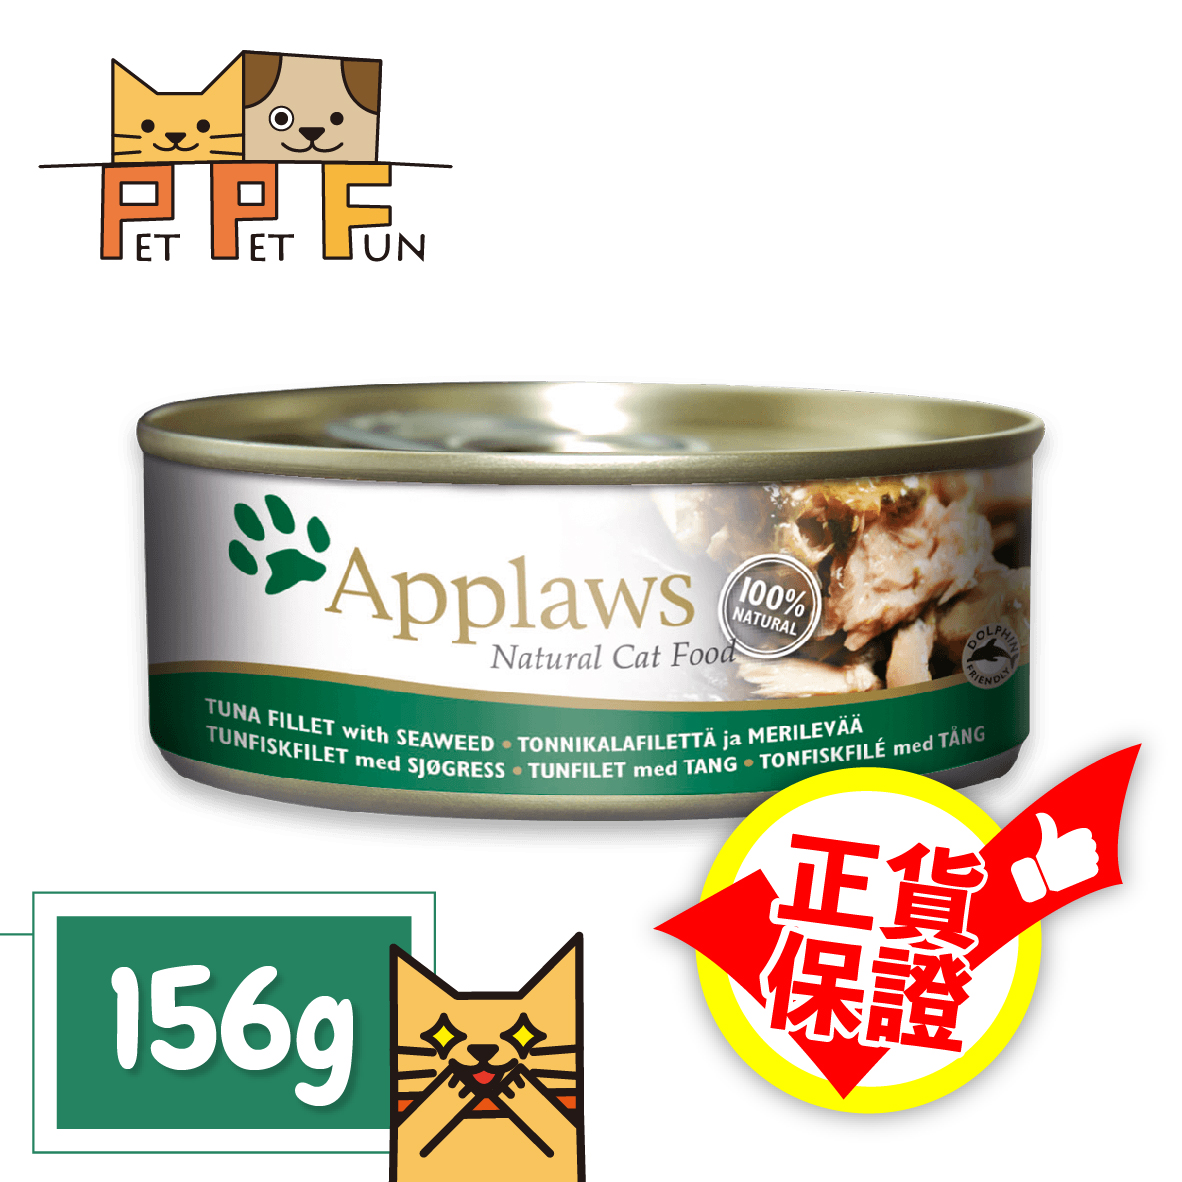 Applaws Feline Cat Tin (2009) Tuna Fillet with Seaweed Cat wet food 156g X6 (Licensed Product)